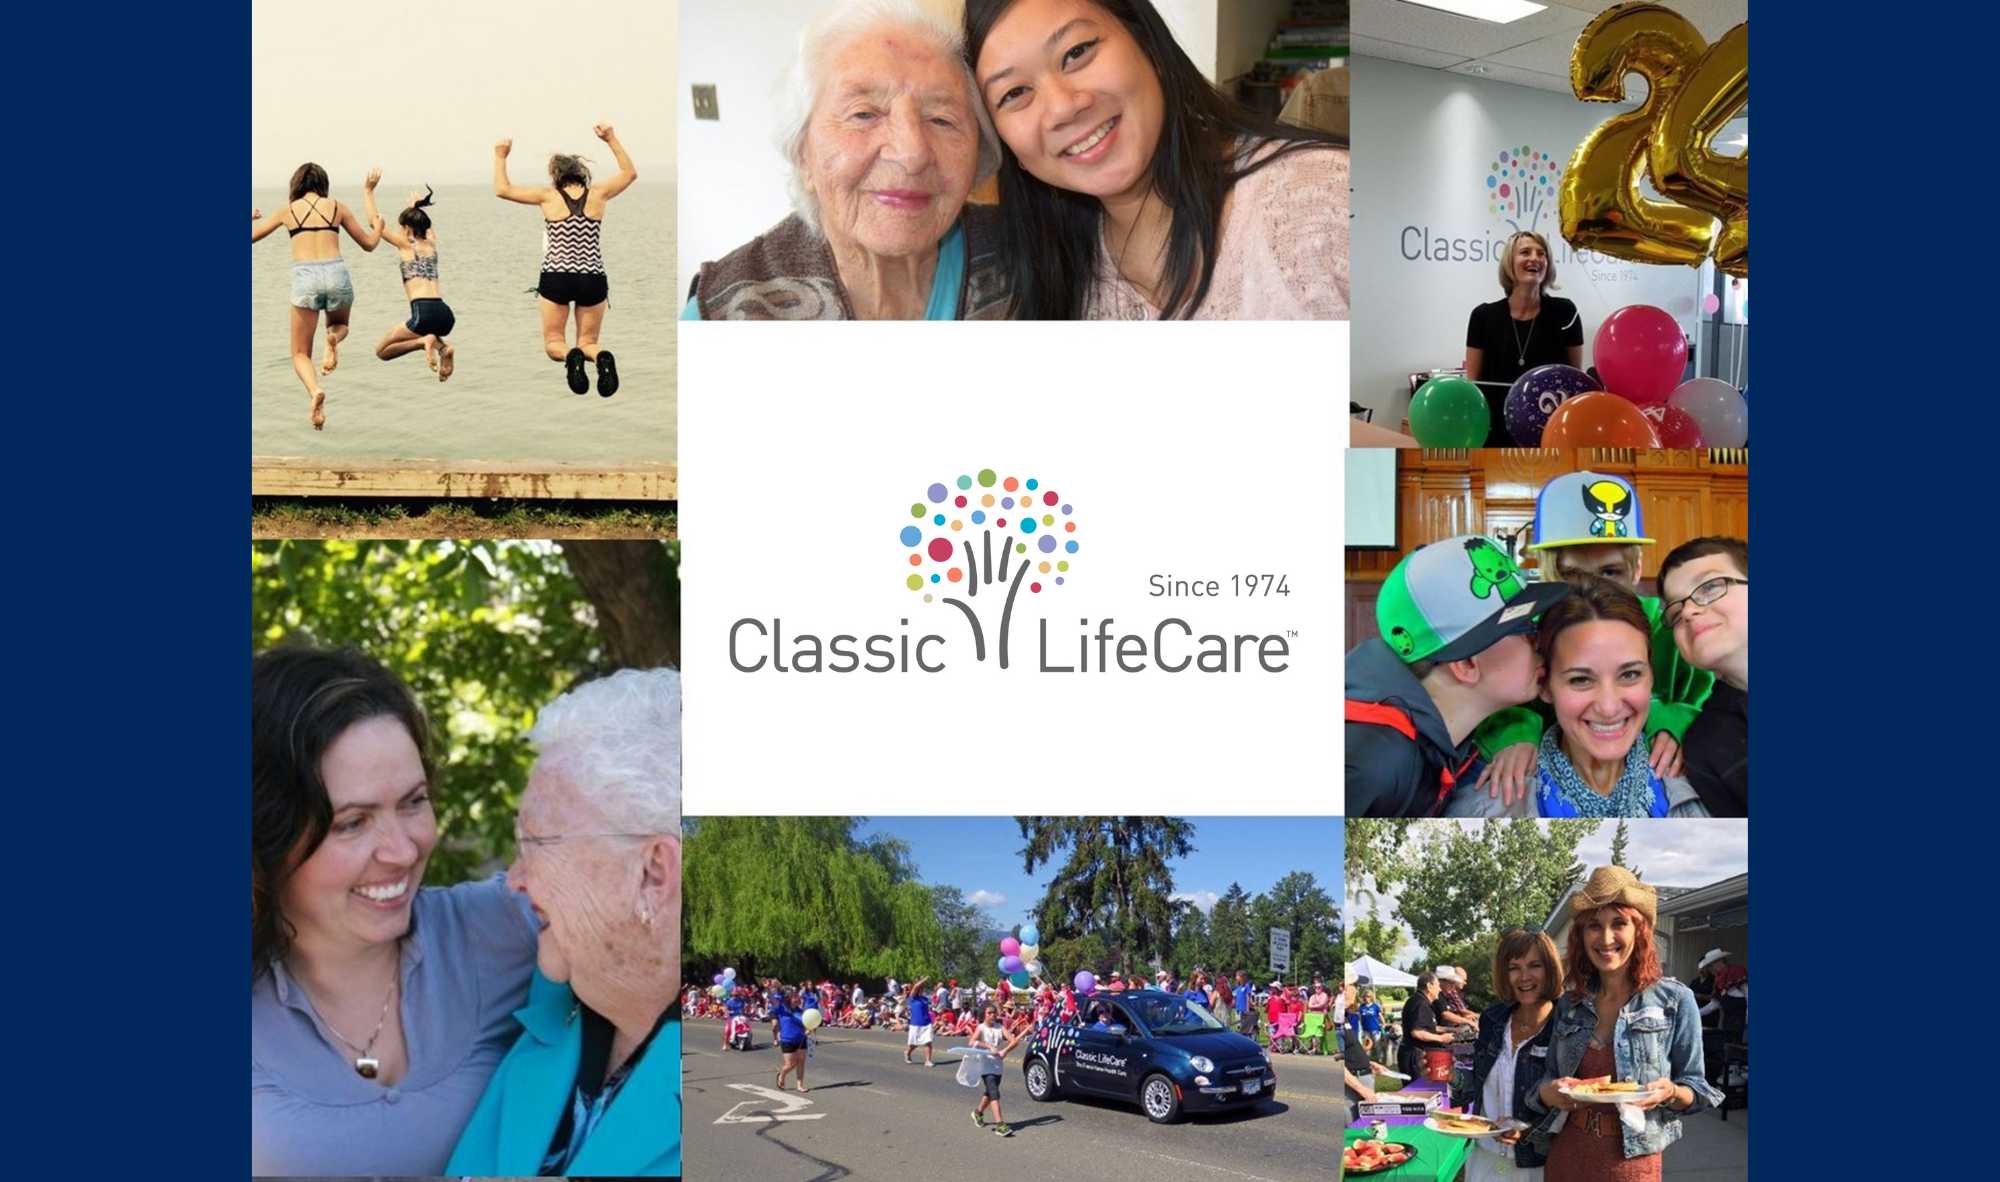 About Classic LifeCare